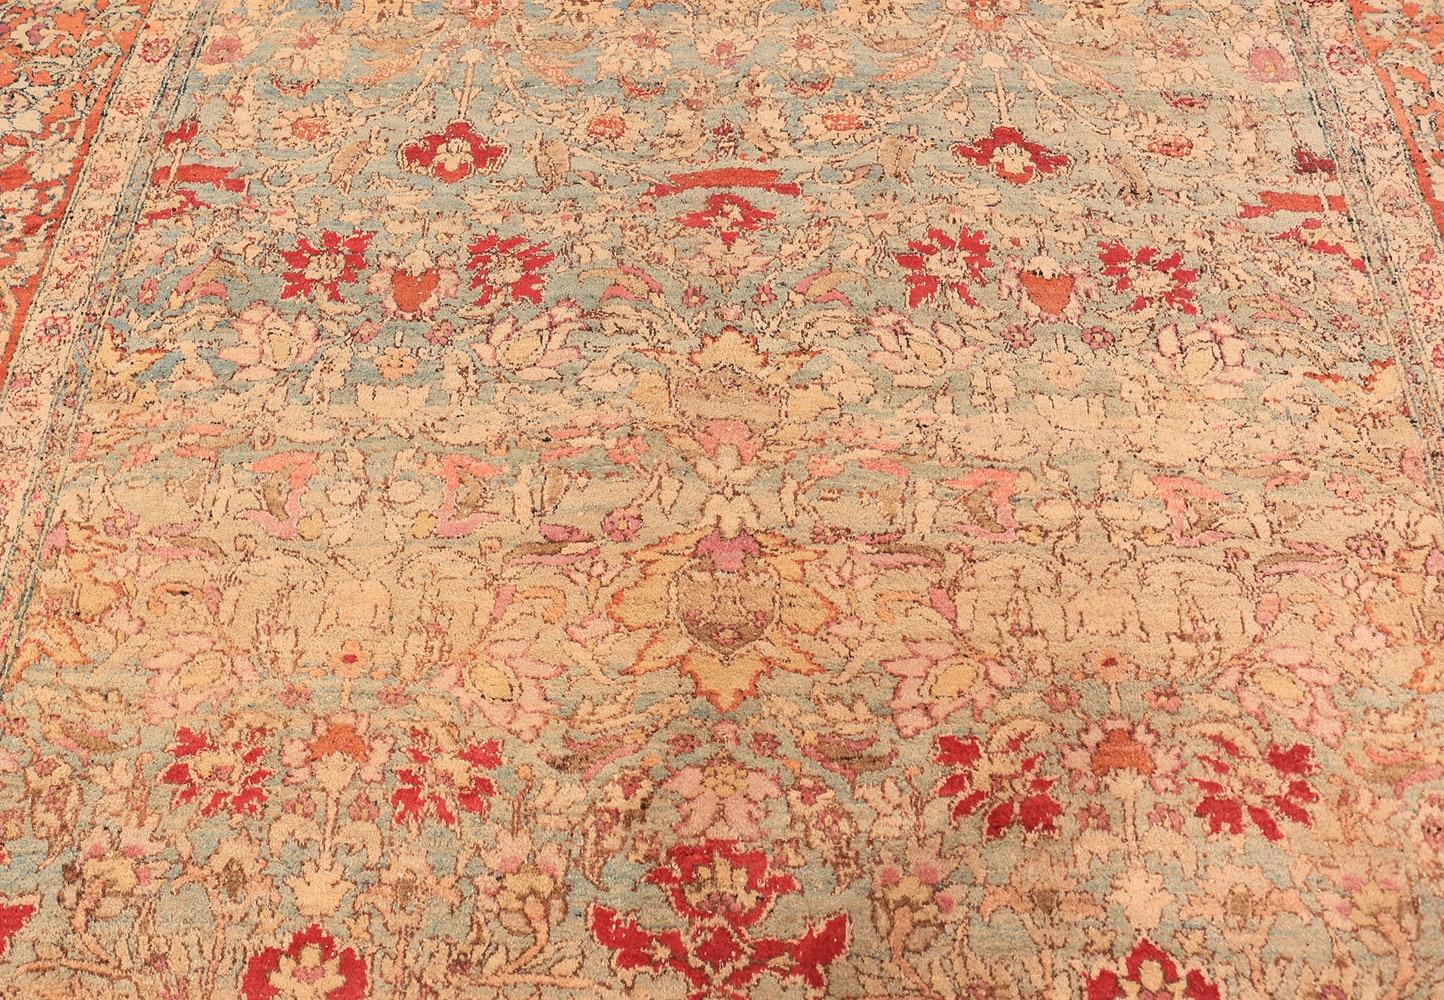 Beautiful floral antique room size Indian Agra rug, country of origin: India, date circa 1880. Size: 10 ft 3 in x 14 ft 4 in (3.12 m x 4.37 m)

This magnificently beautiful rug would at first appear to be Persian or perhaps even a French rug, but